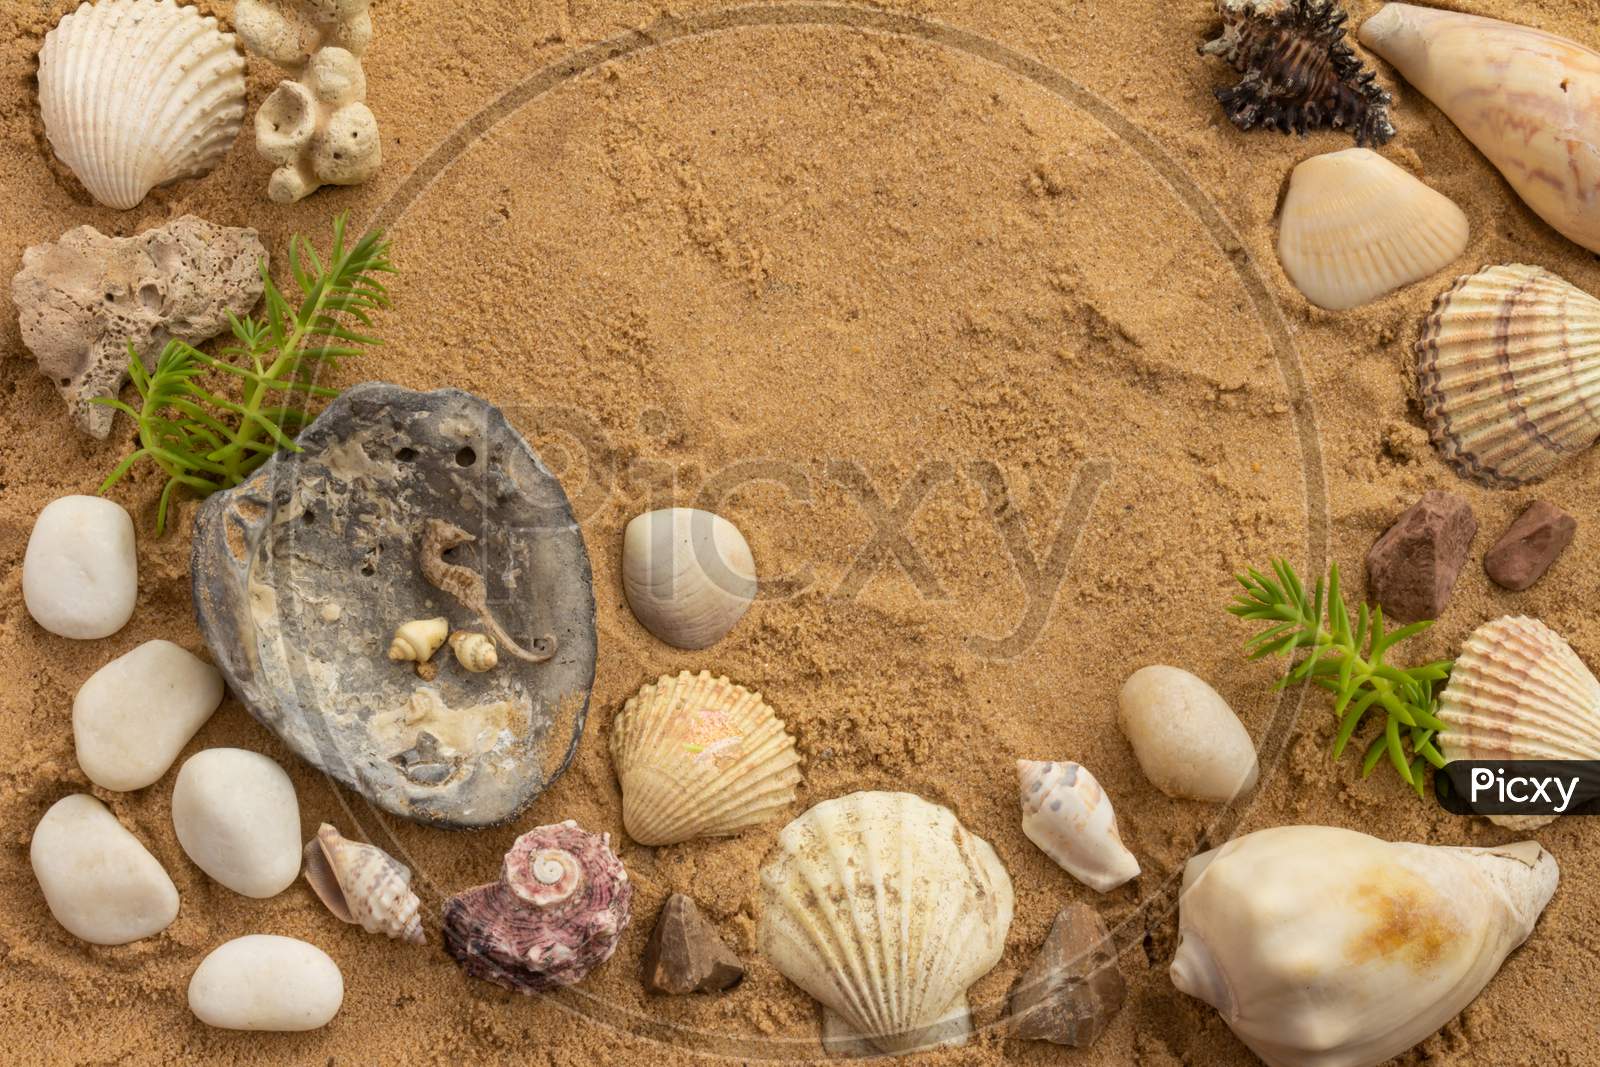 Seashells And Beach Stones On The Sand On A Sunny Day. Marine Items On A Beach While On Vacation.